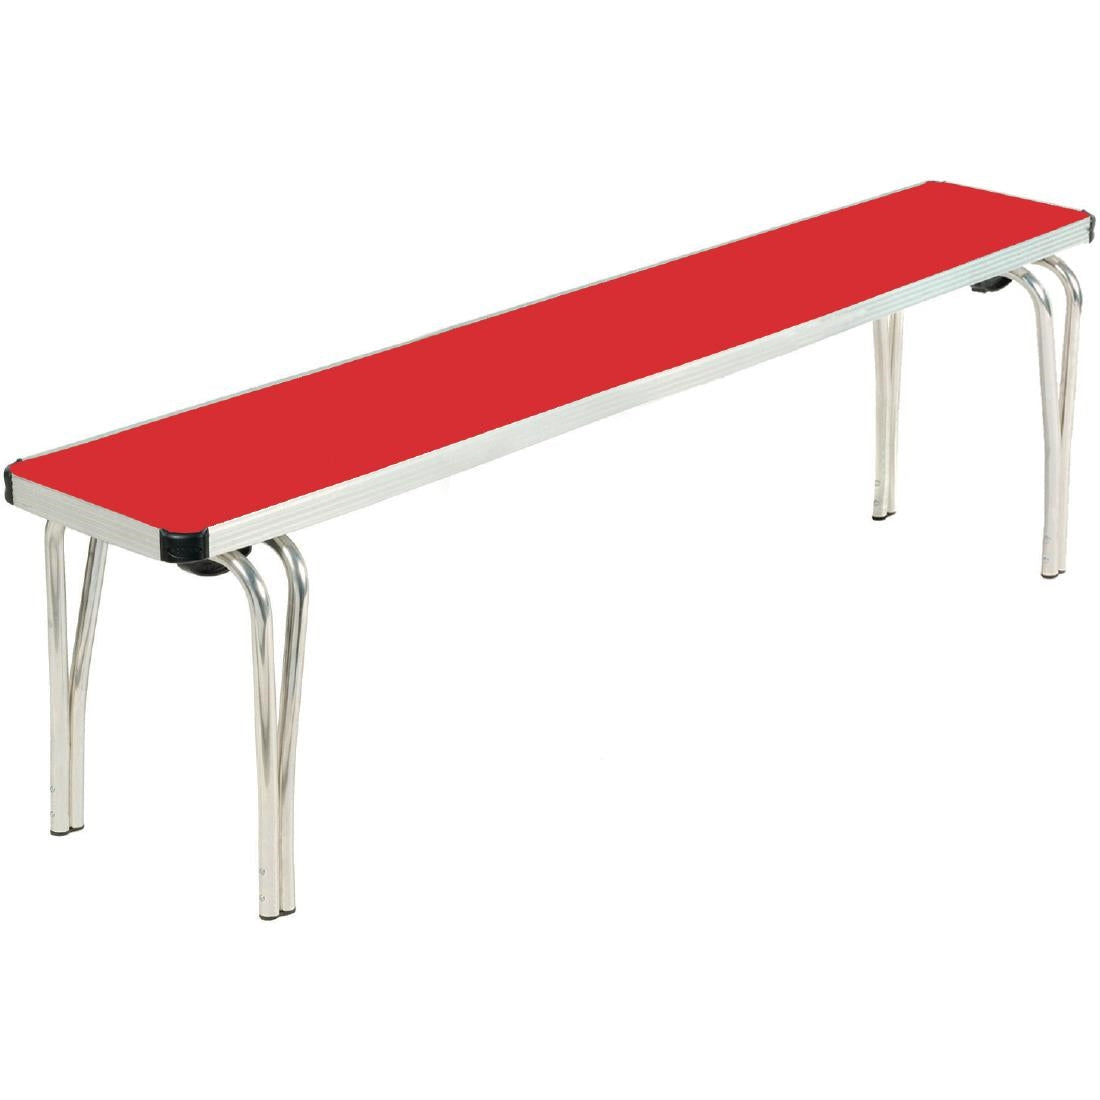 DM699 Gopak Contour Stacking Bench Red 5ft JD Catering Equipment Solutions Ltd